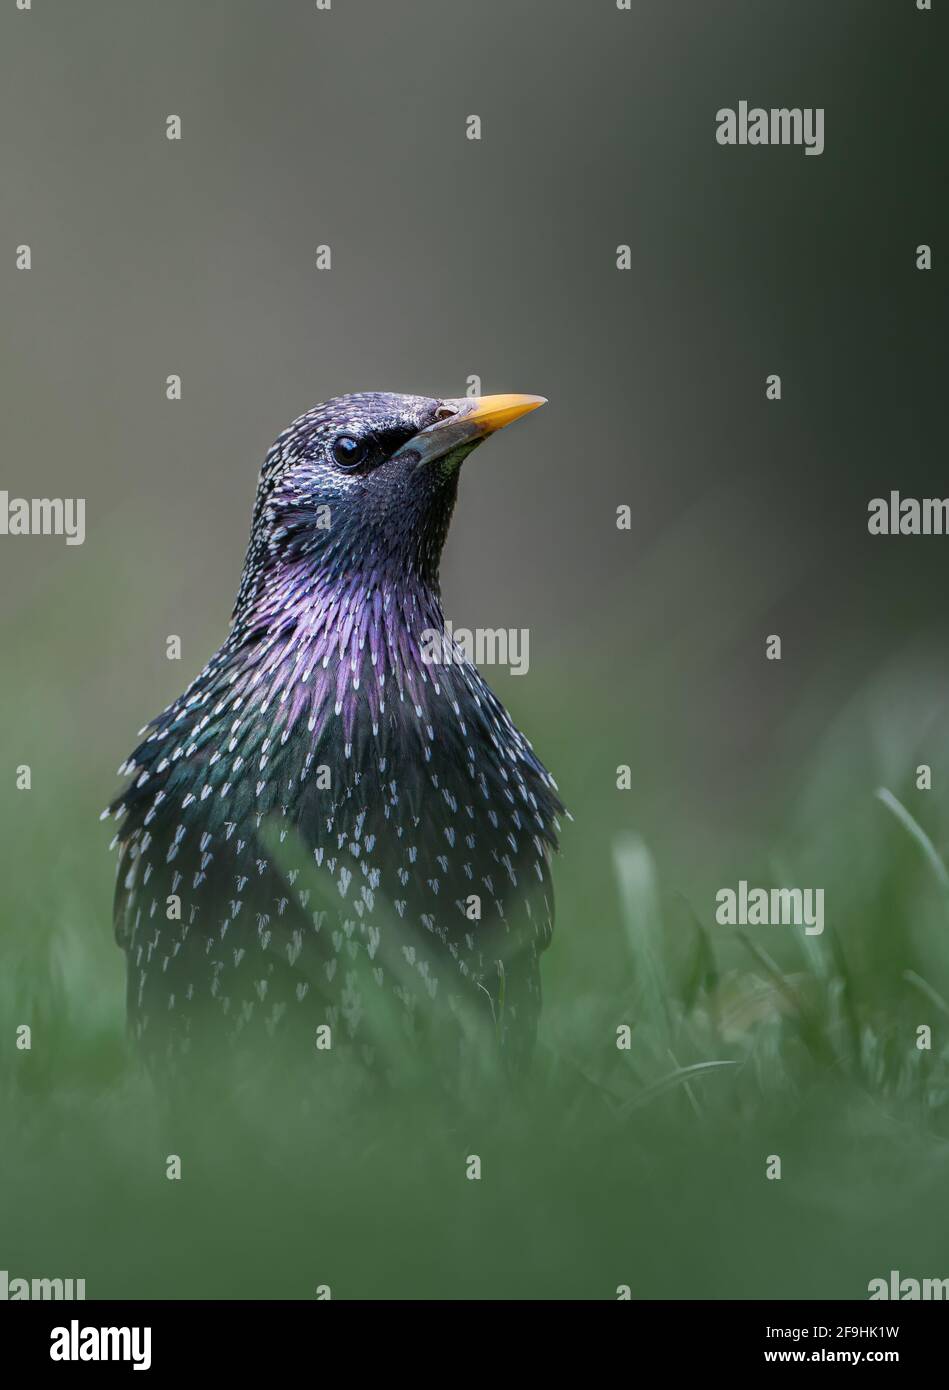 Close-up frontal view of European starling (Sturnus vulgaris) sitting in green grass. Isolated on blurred background. Shallow depth of field Stock Photo